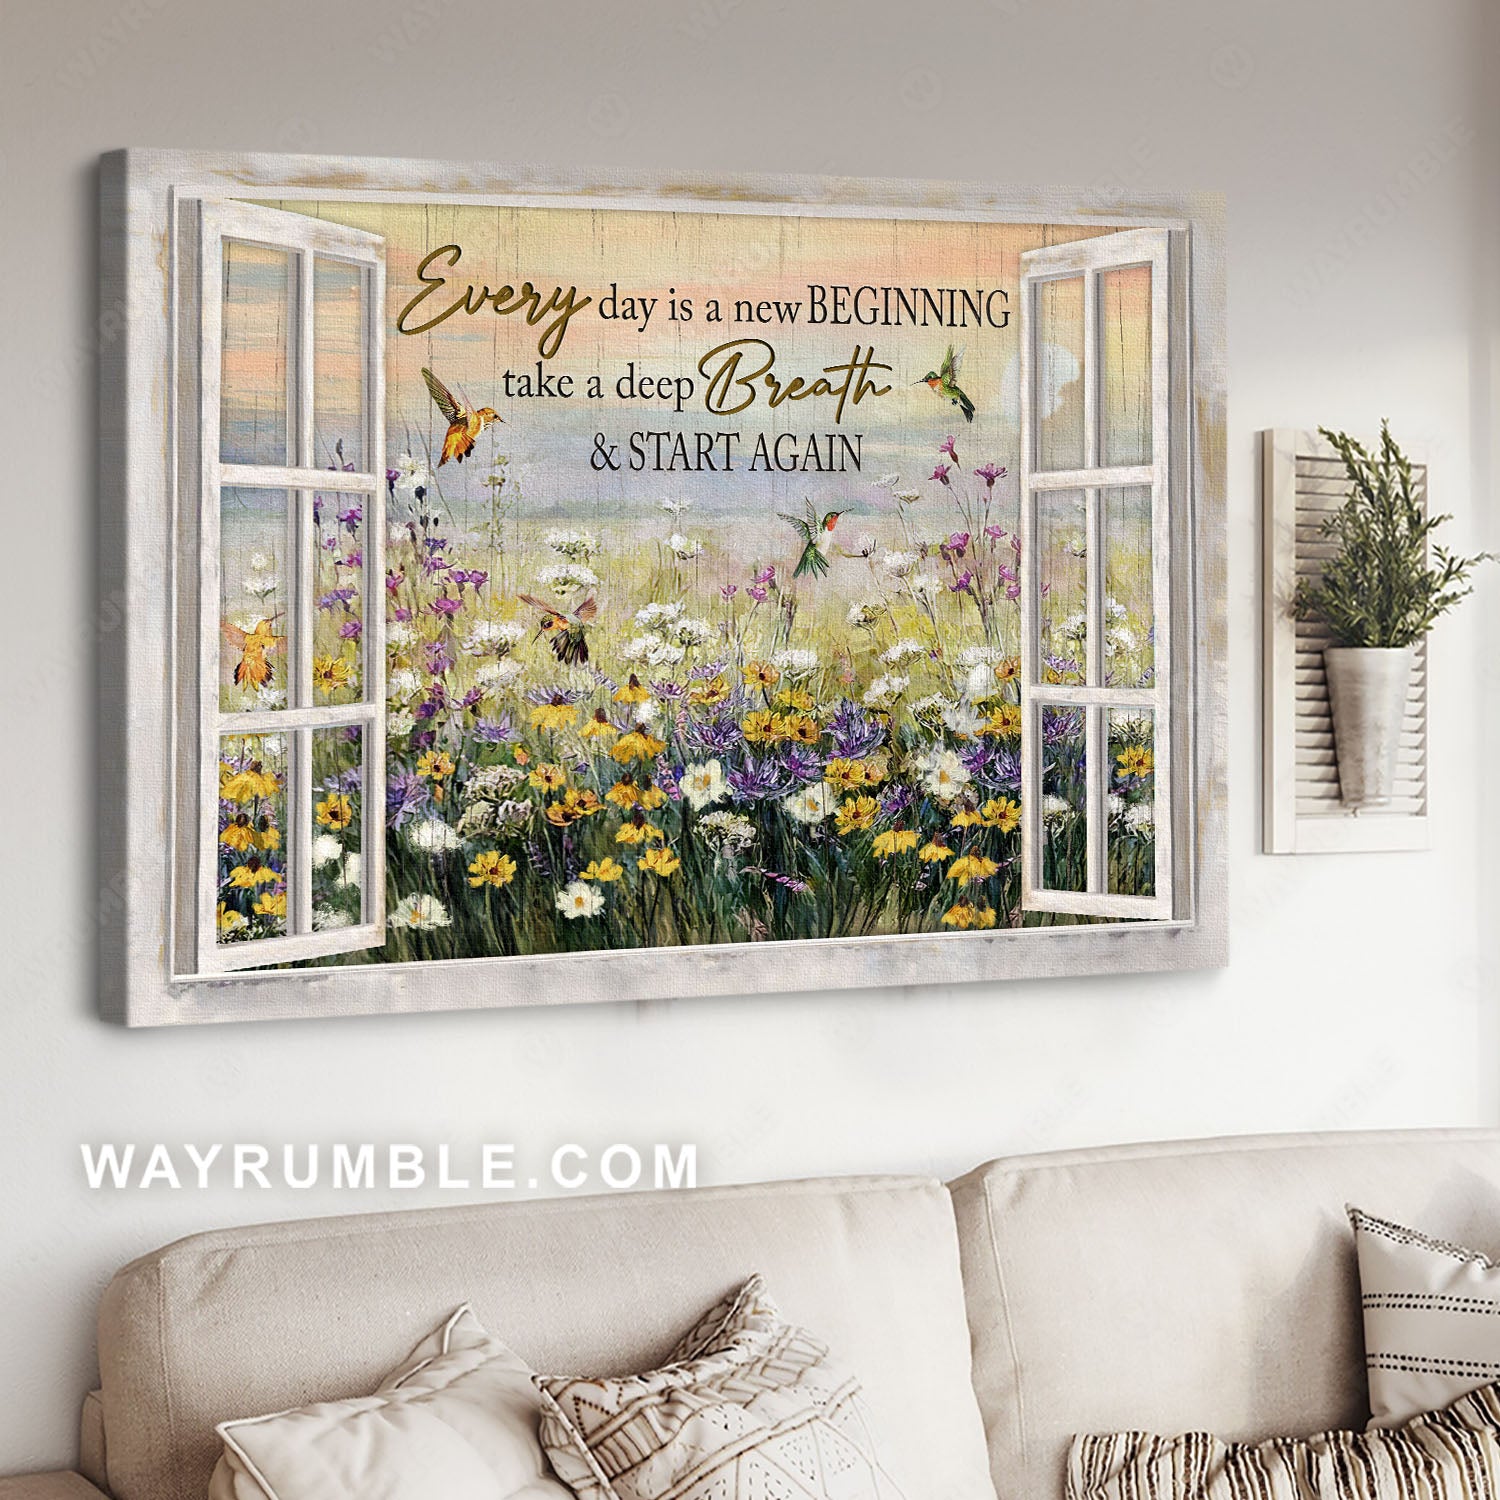 Flower field, Hummingbird drawing, Window frame, Every day is a new beginning - Jesus Landscape Canvas Prints, Home Decor Wall Art